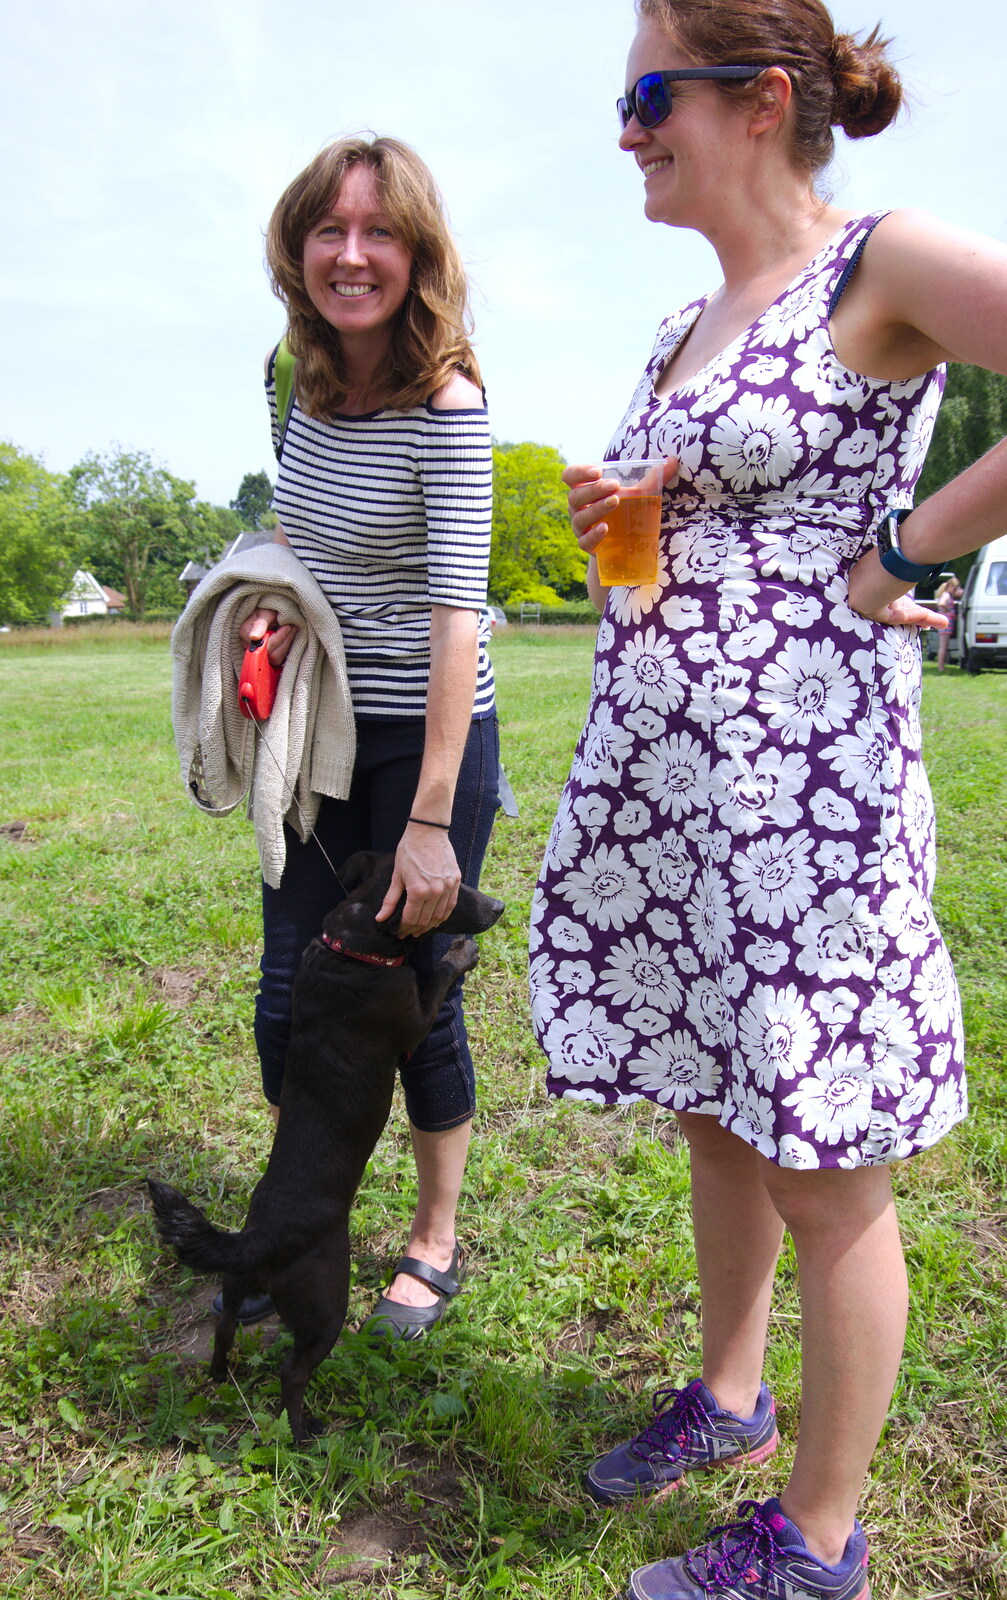 Martina and Pip the dog, with Isobel from A Hog Roast on Little Green, Thrandeston, Suffolk - 23rd June 2019